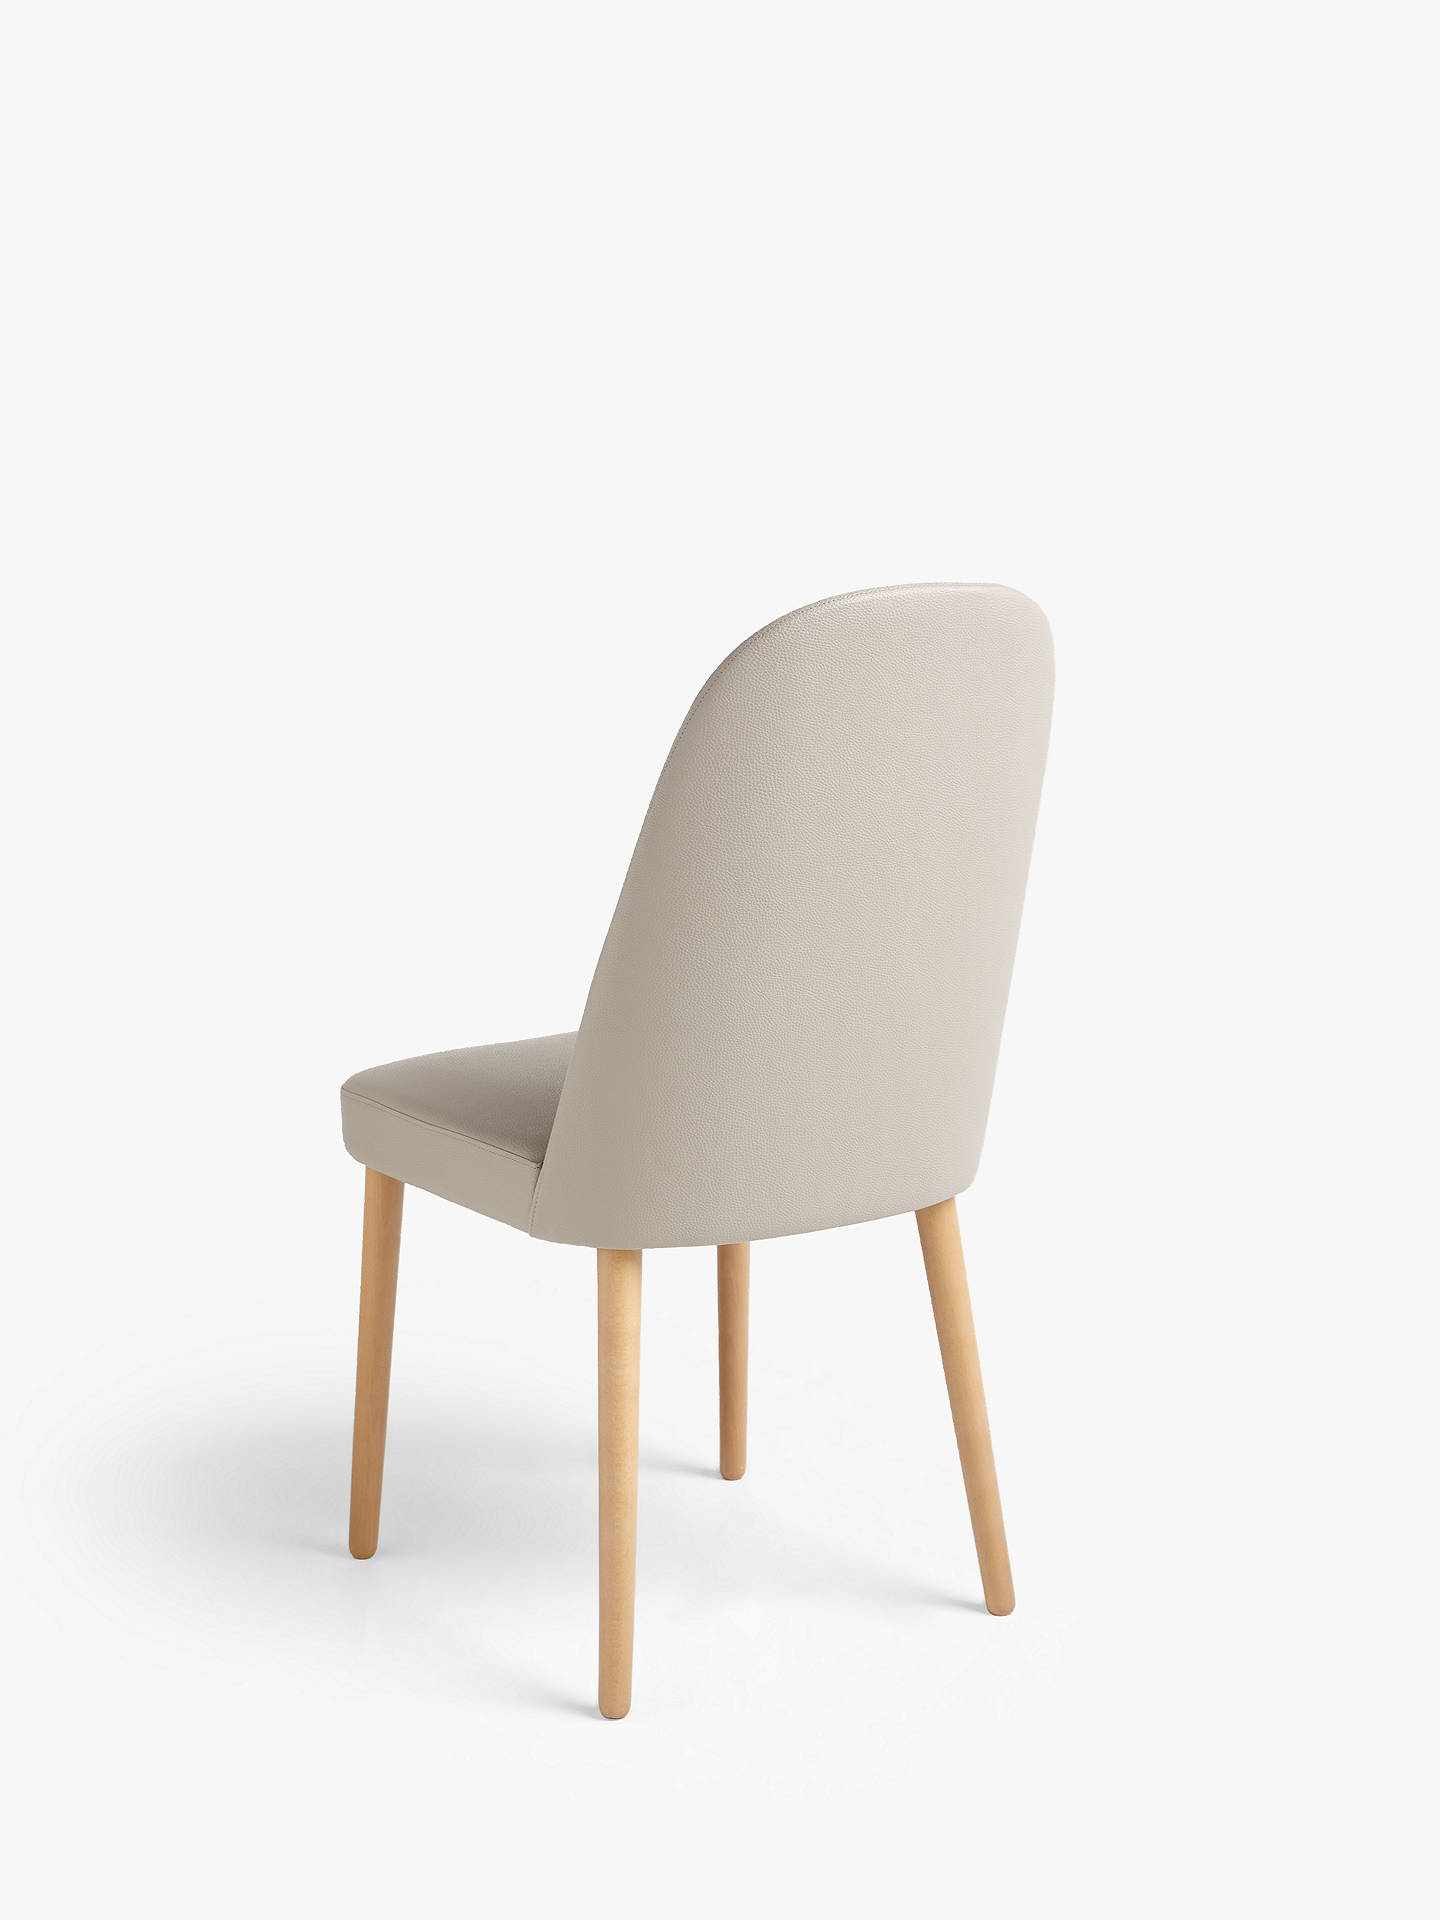 ANYDAY John Lewis & Partners Spindle Dining Chair, Set of